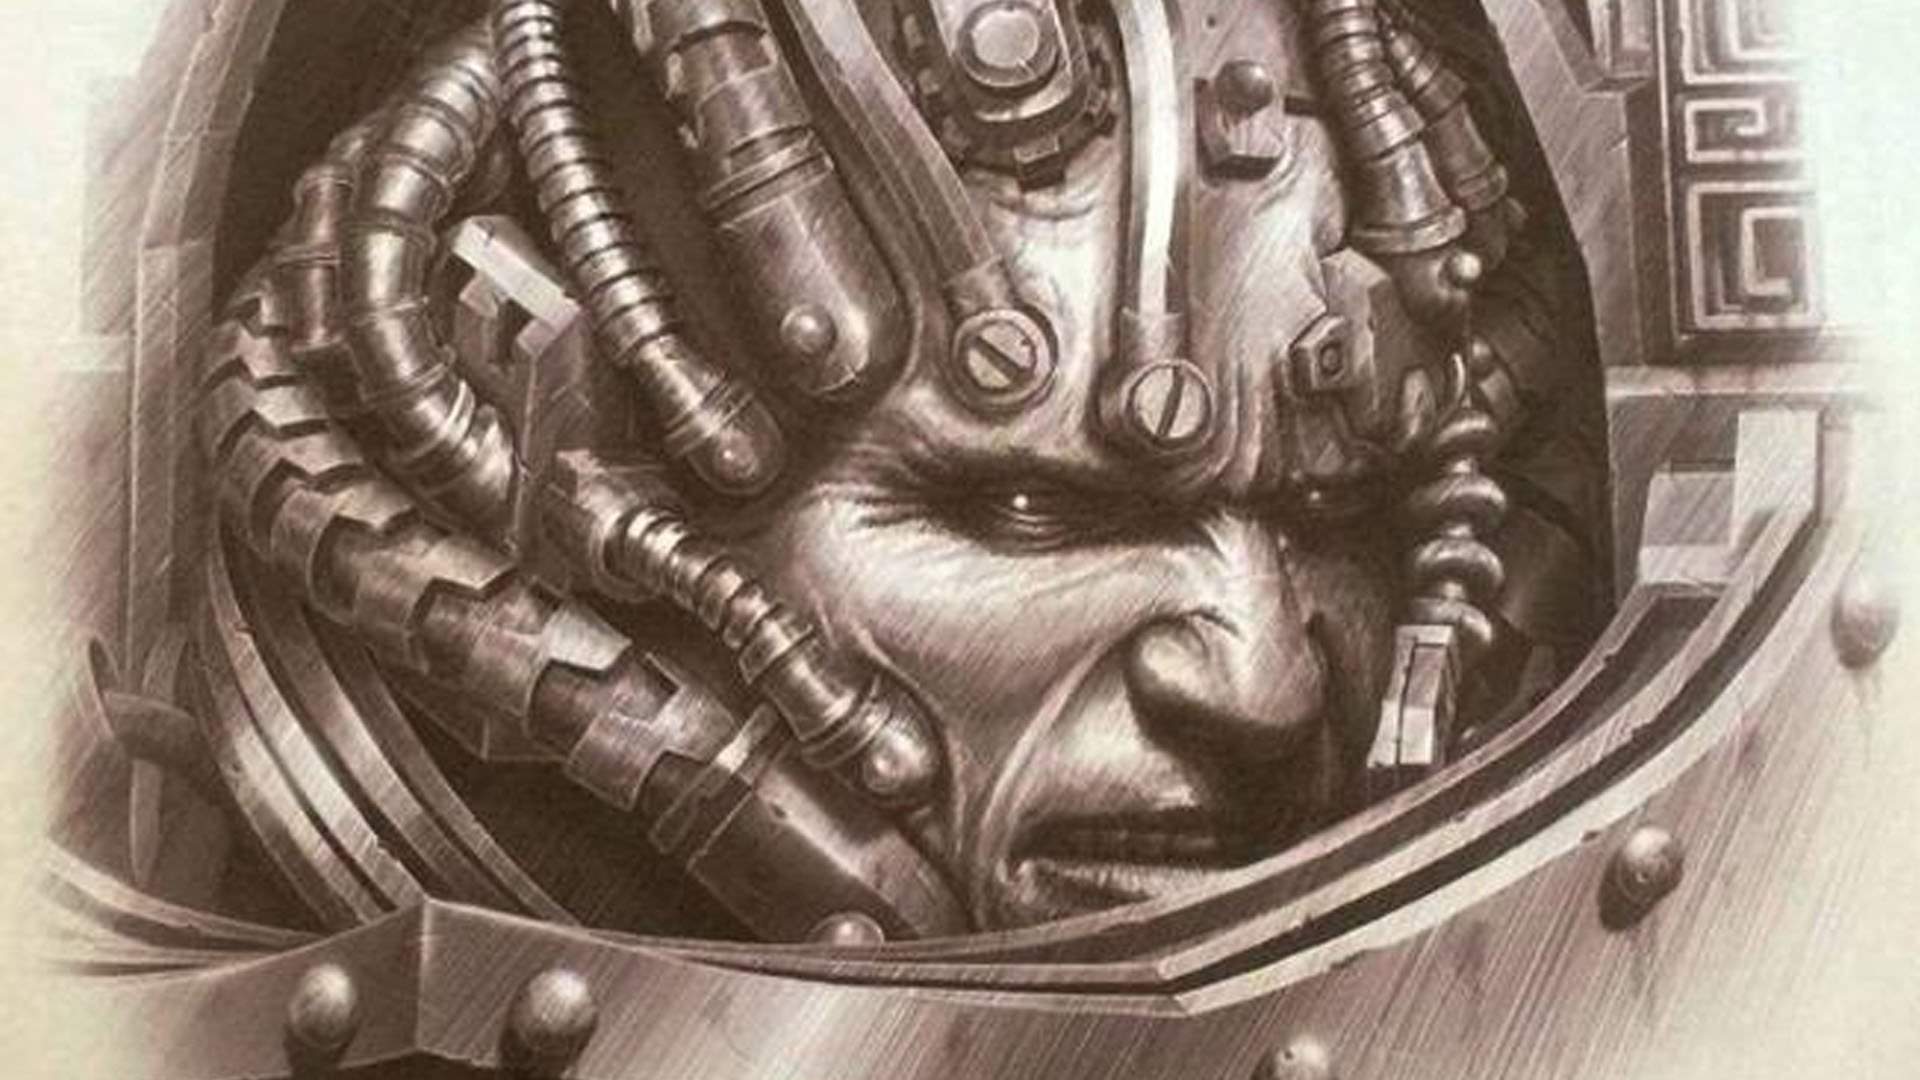 Warhammer 40k Perturabo guide - Games Workshop artwork showing a portrait of Perturabo's face close up, covered in data ports, plugs, and cables